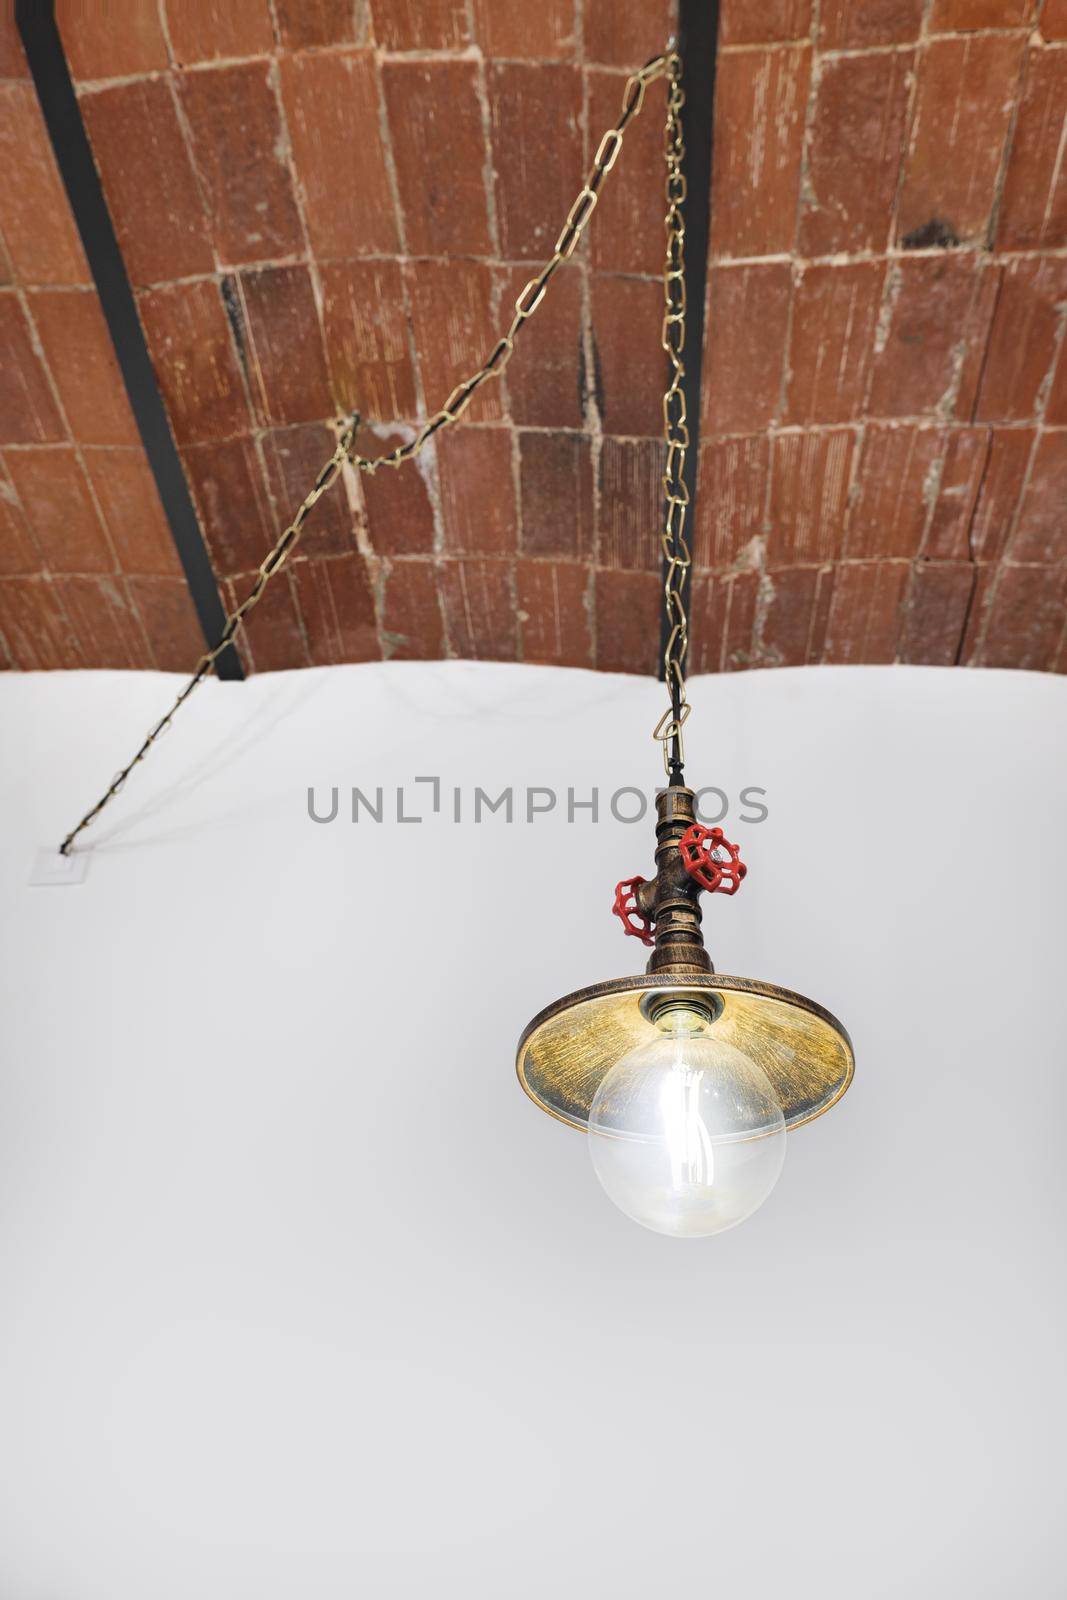 Vintage lamp of plumbing style hanging on chain on background of white wall with brick ceilings. by apavlin